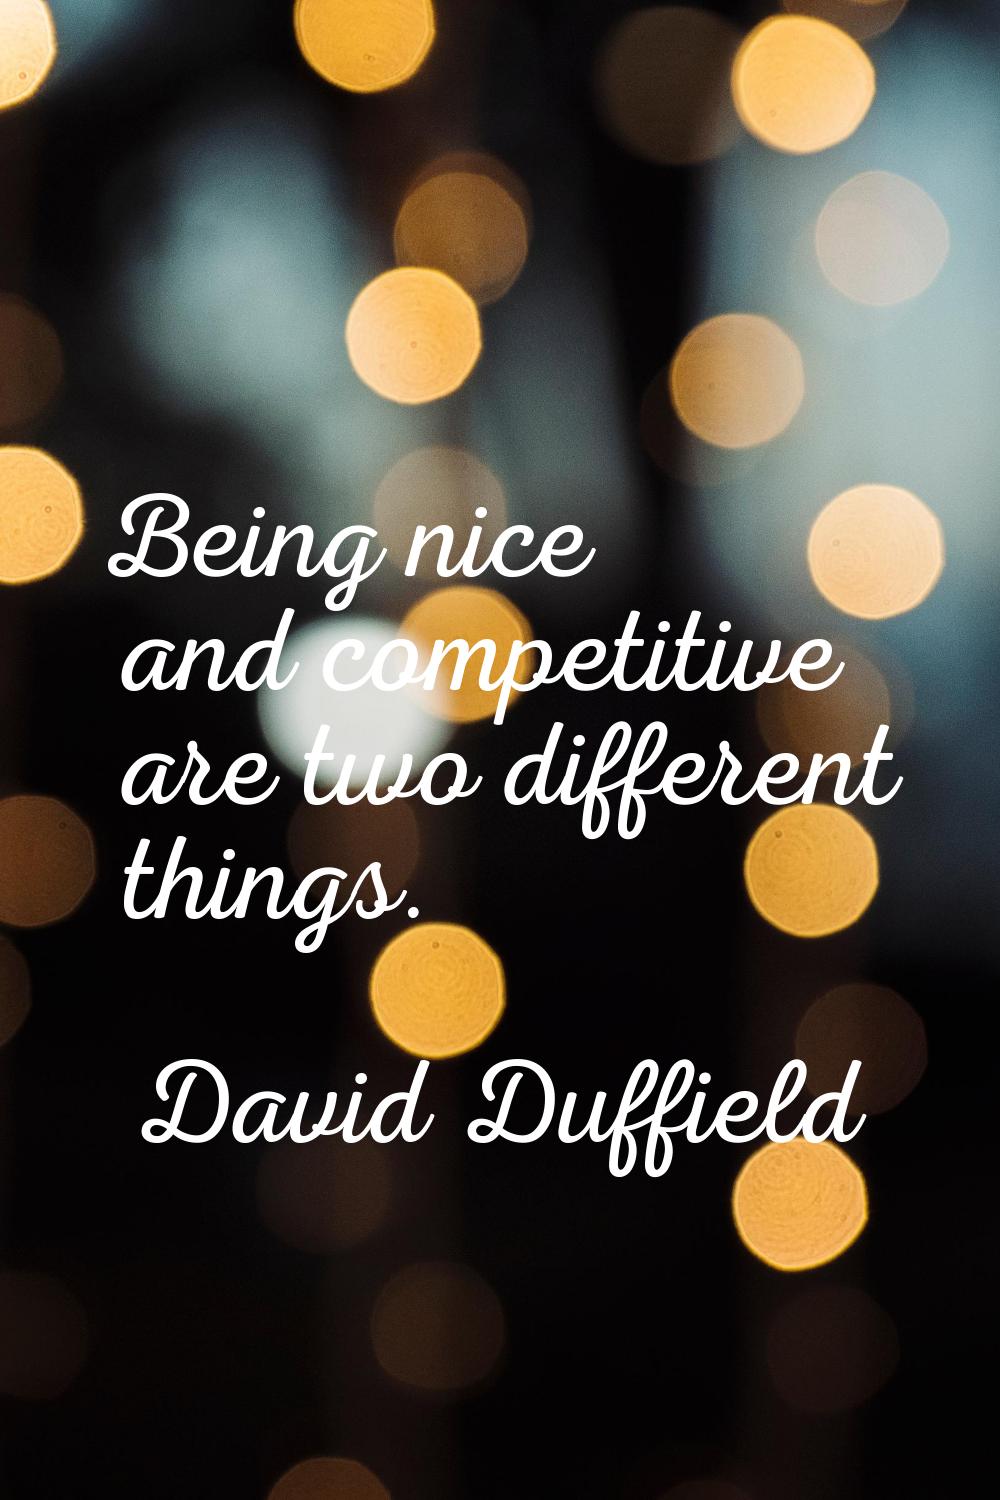 Being nice and competitive are two different things.